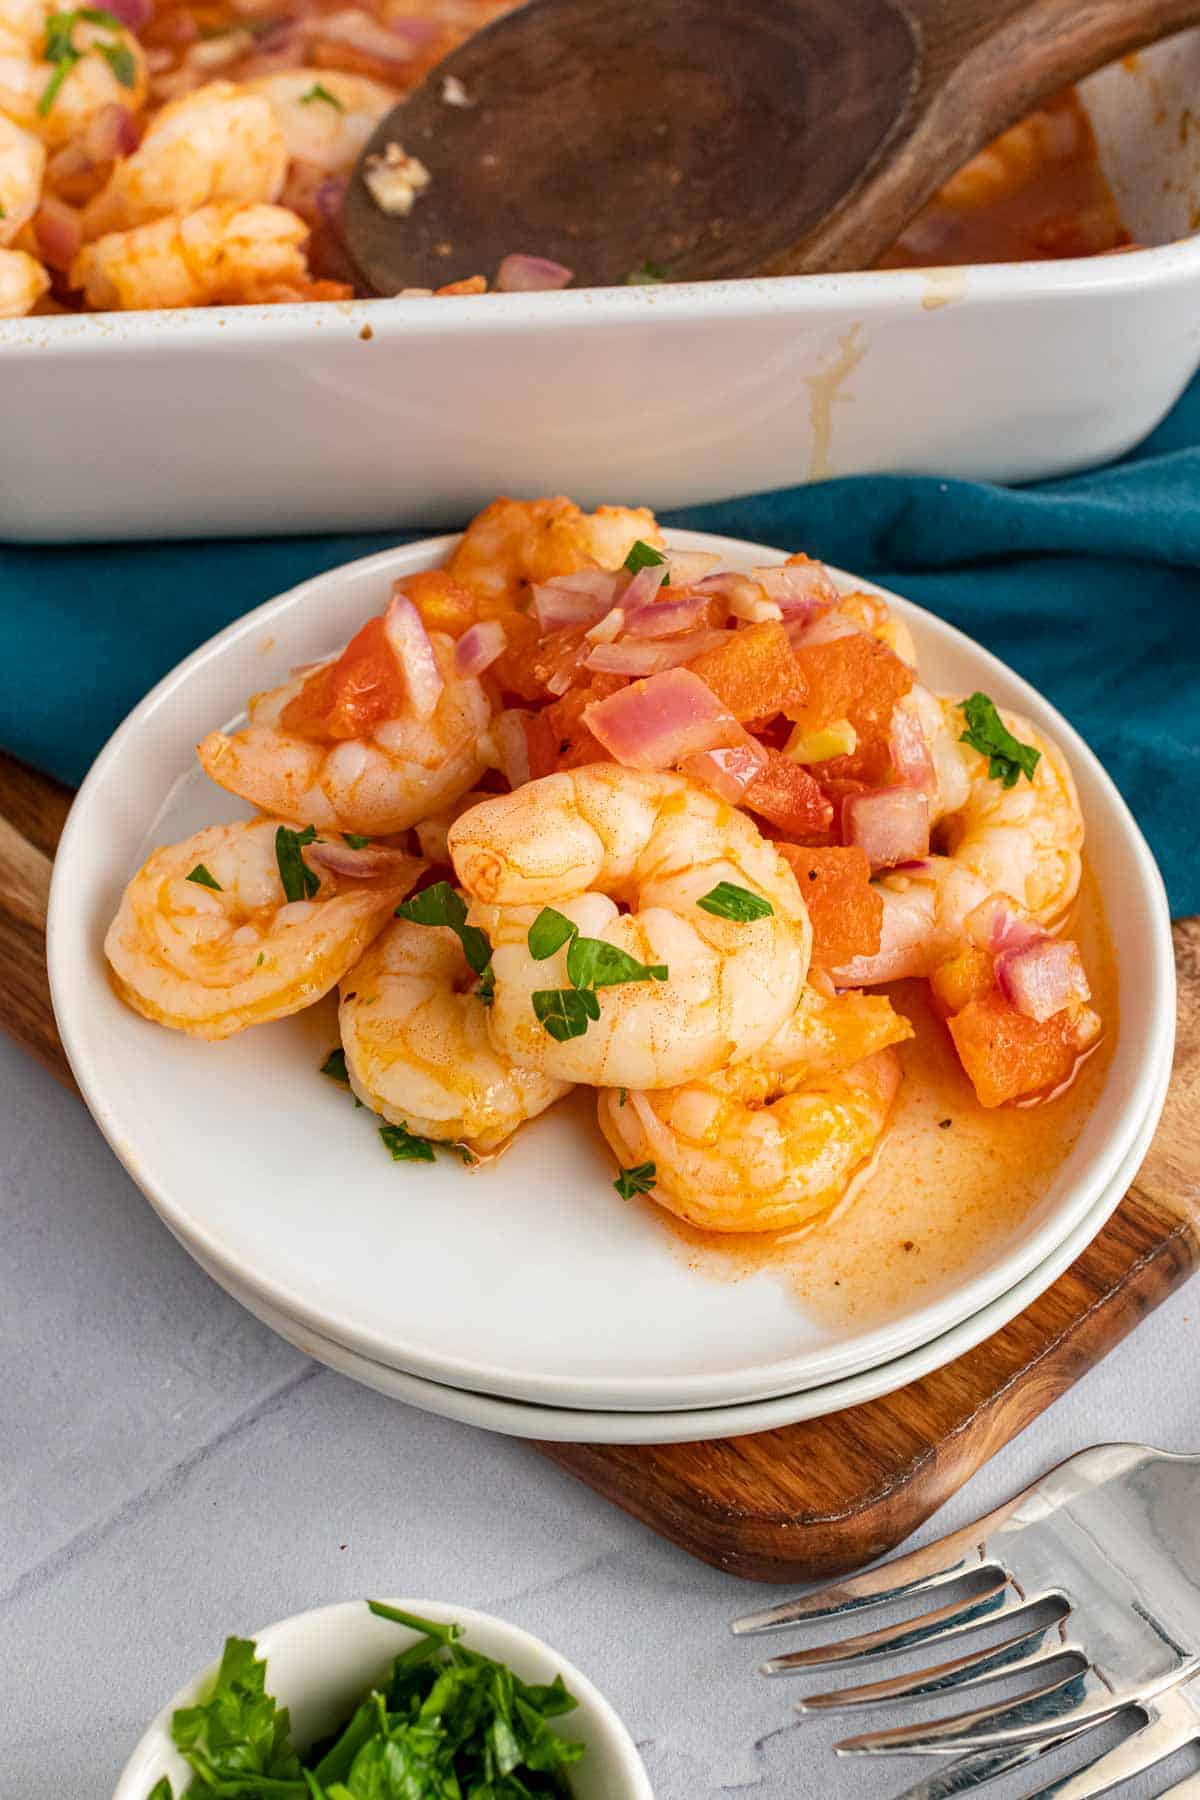 Plate of Garlic and Tomato Roasted Shrimp on table